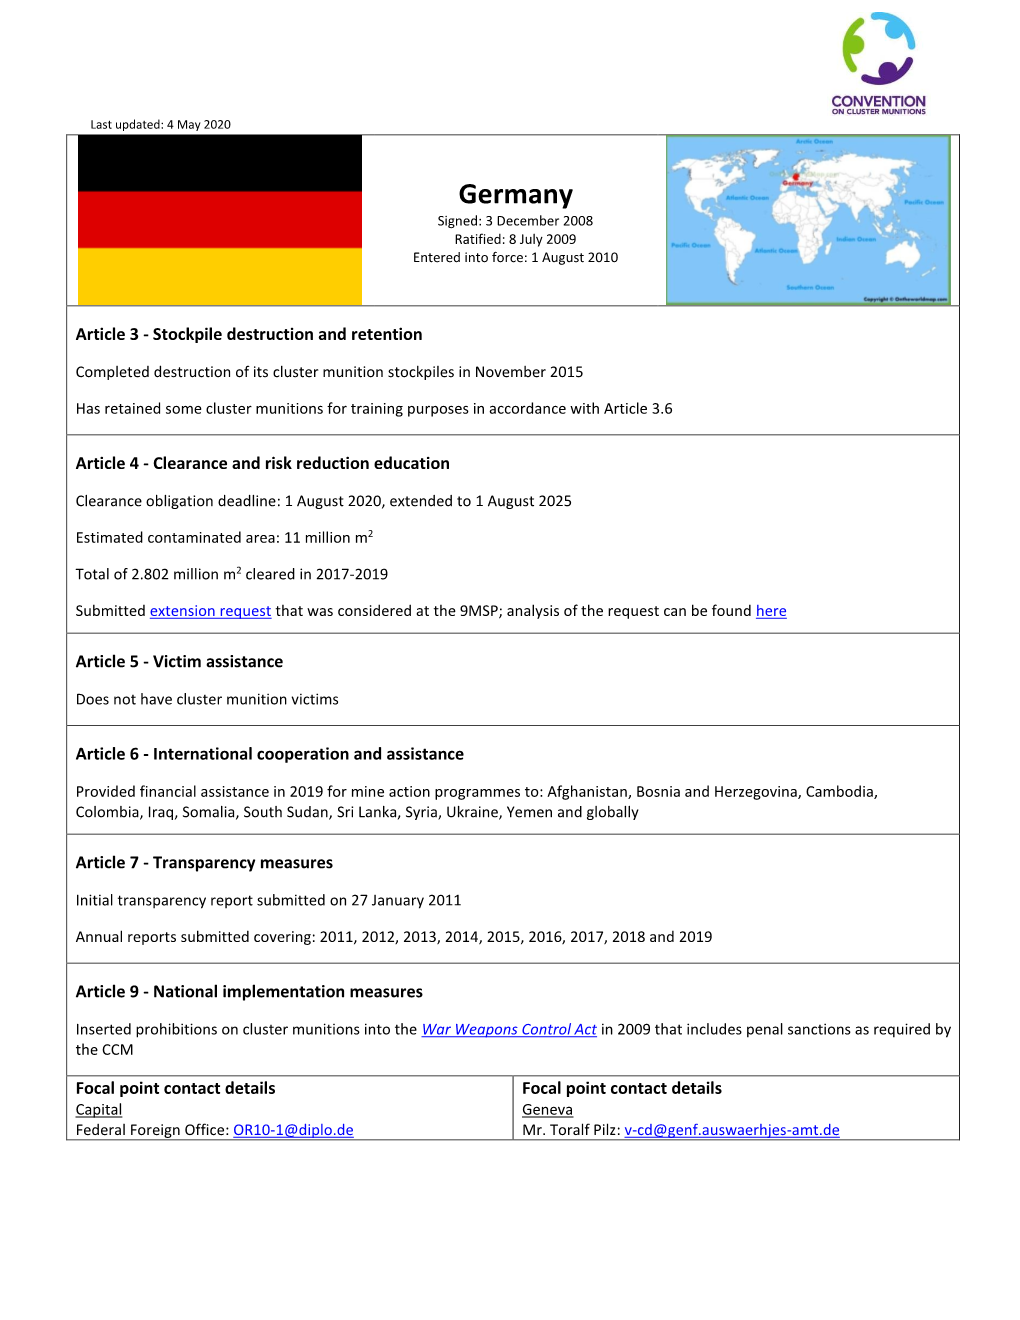 Germany Signed: 3 December 2008 Ratified: 8 July 2009 Entered Into Force: 1 August 2010